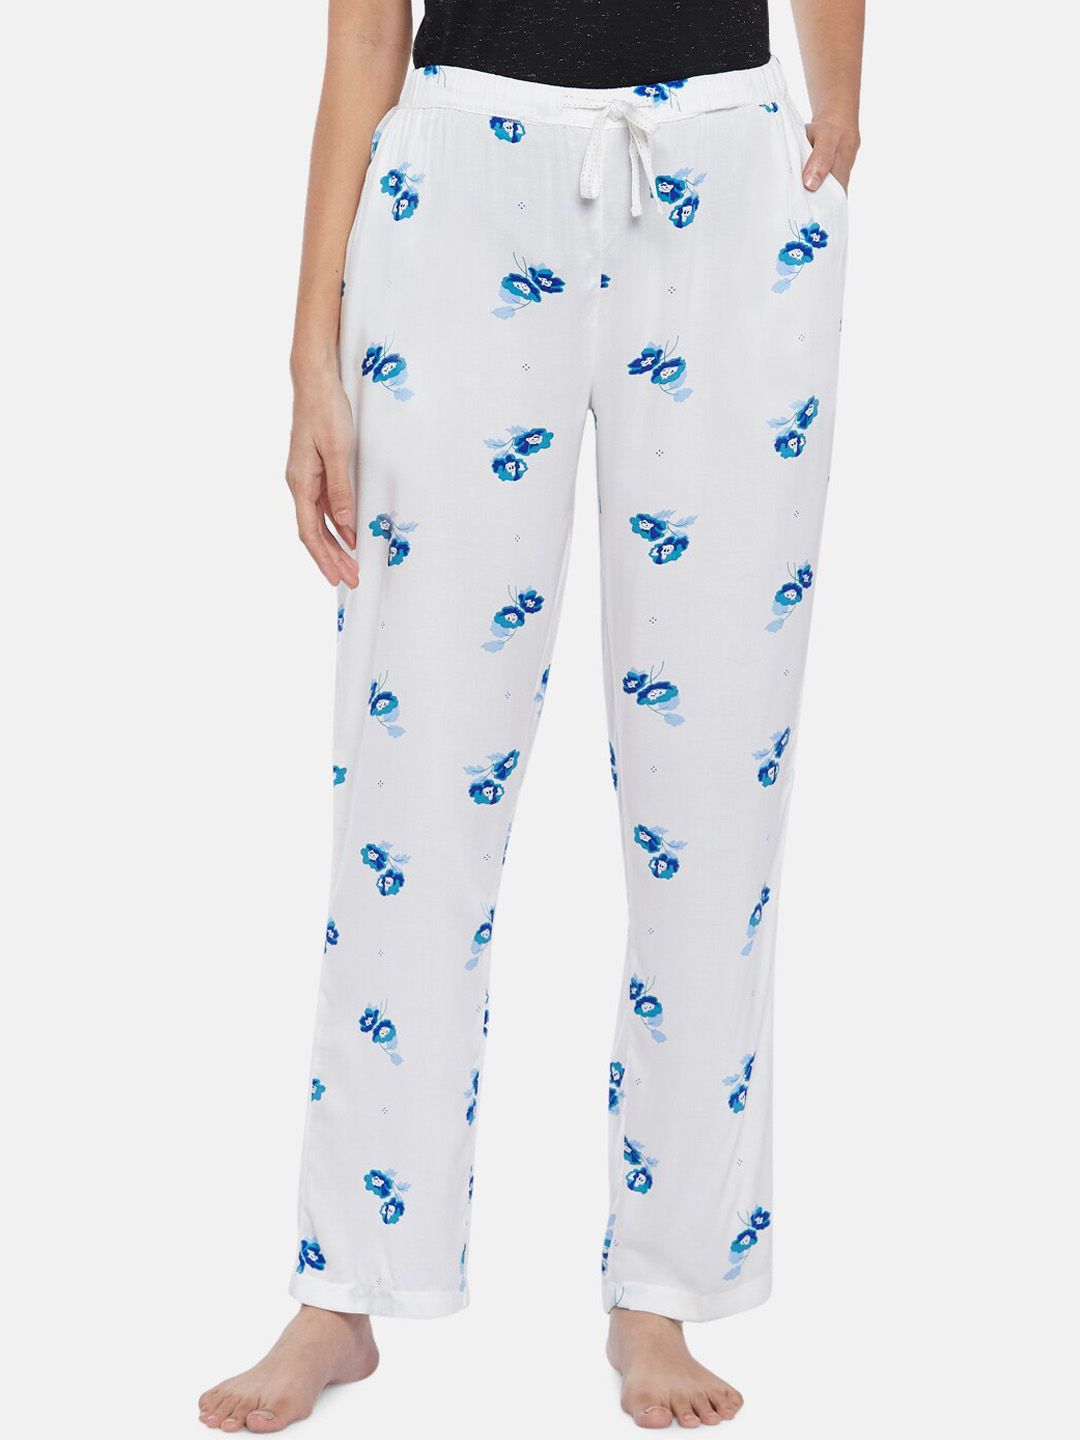 Dreamz by Pantaloons Woman Off-White Floral Printed Lounge Pants Price in India